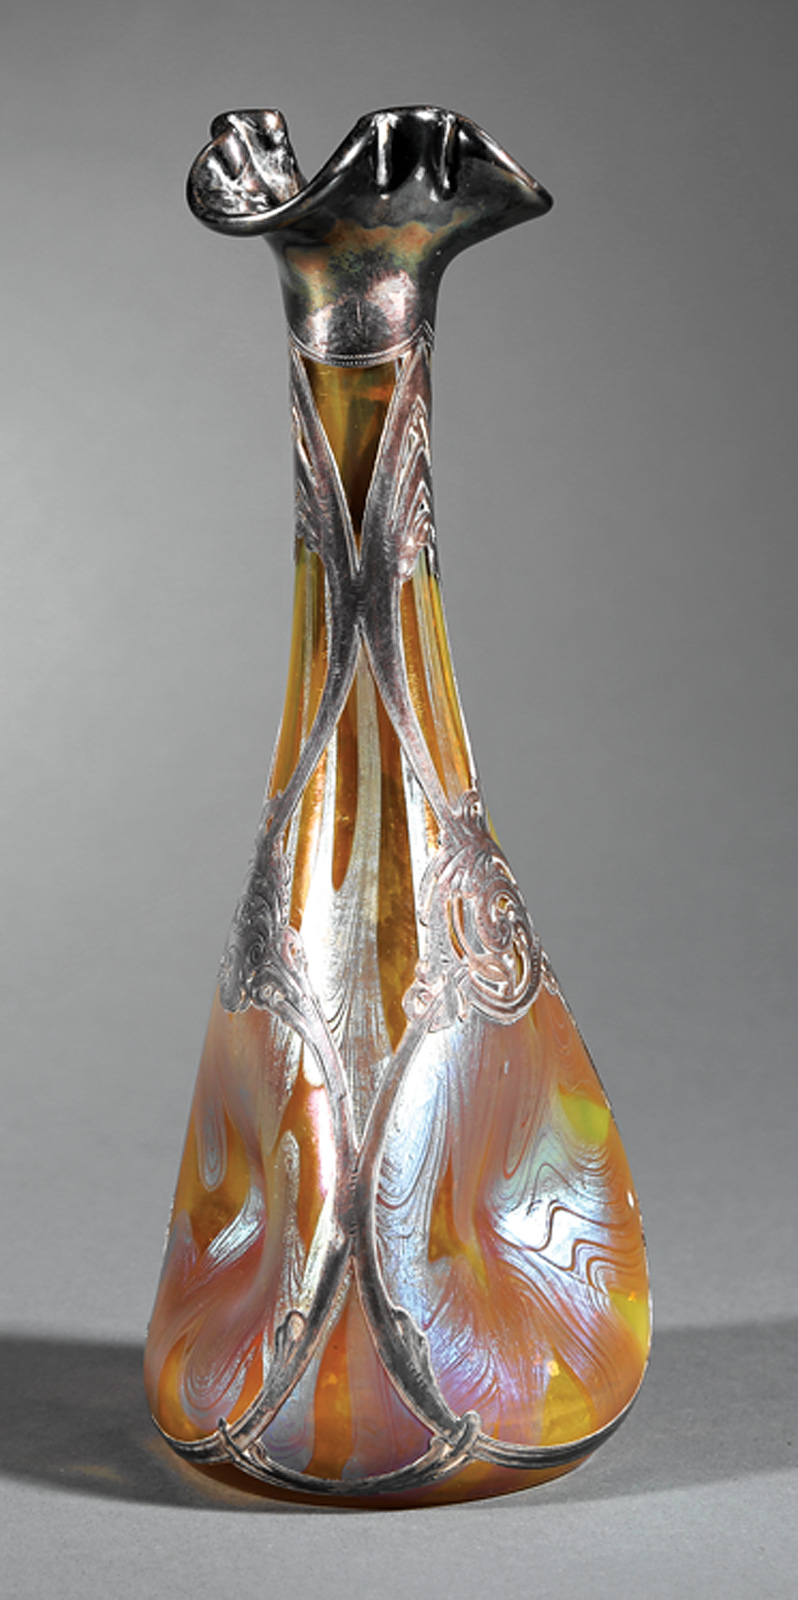 Continental Art Glass and Sterling Silver Overlay Vase, c. 1900, attr. to Loetz, yellow glass with - Image 2 of 2